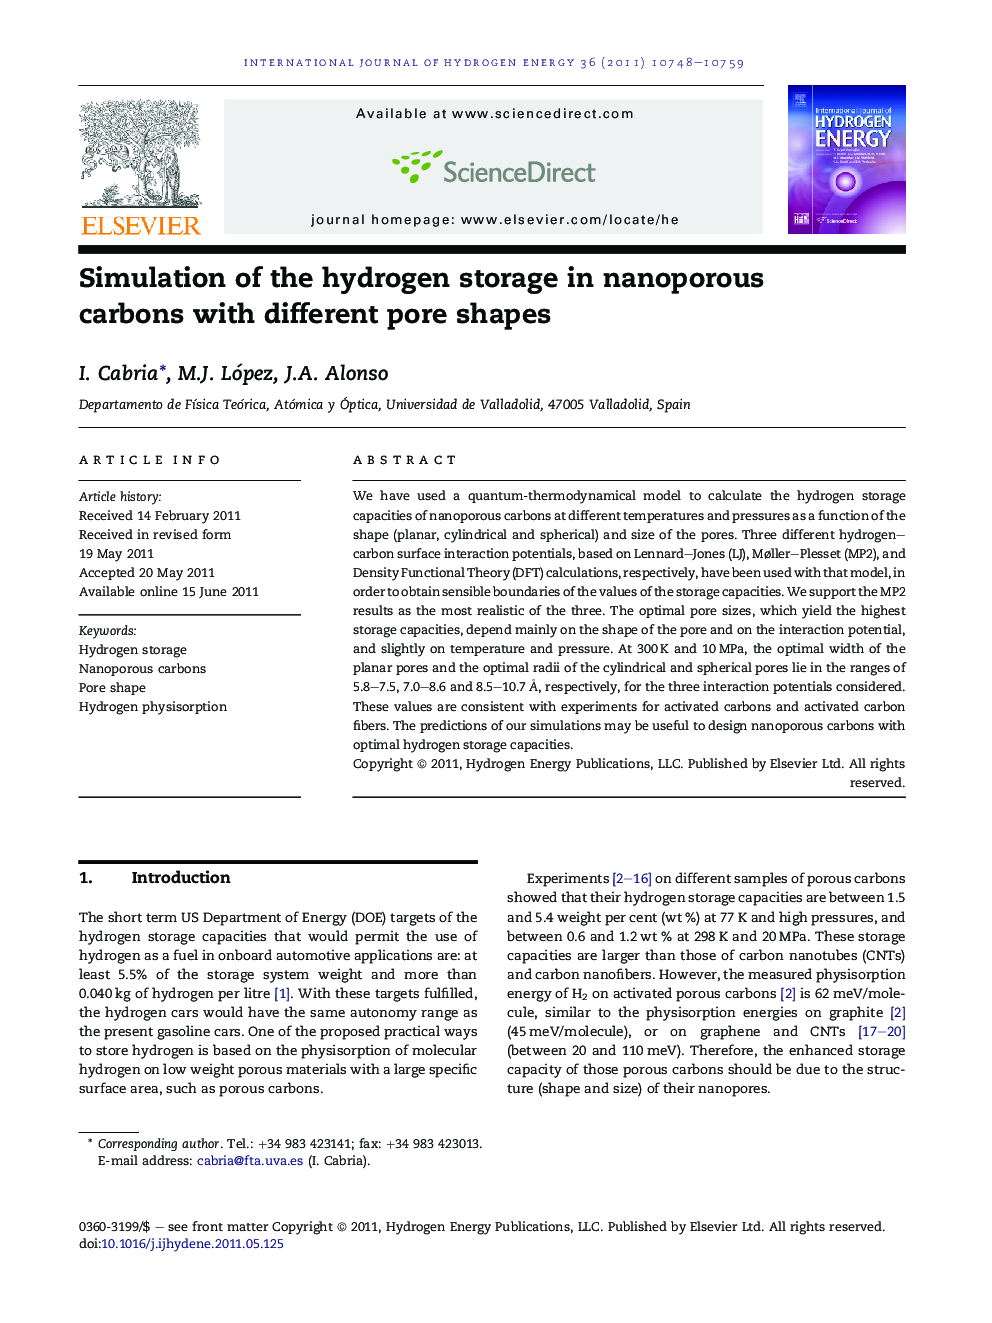 Simulation of the hydrogen storage in nanoporous carbons with different pore shapes